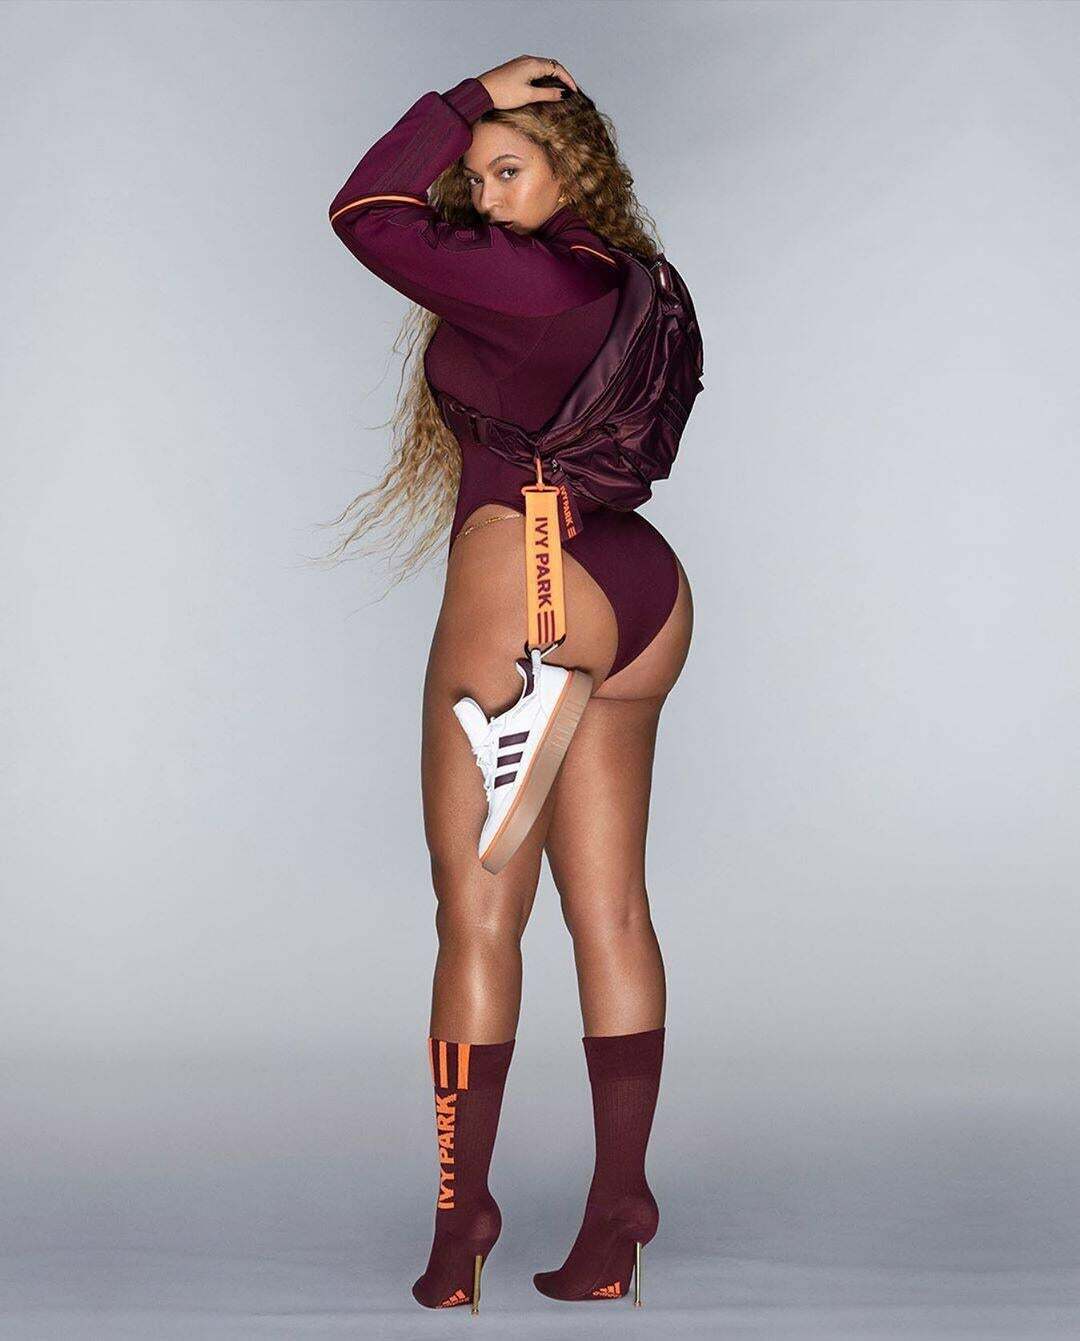 Beyonce needs to be dominated by white cocks